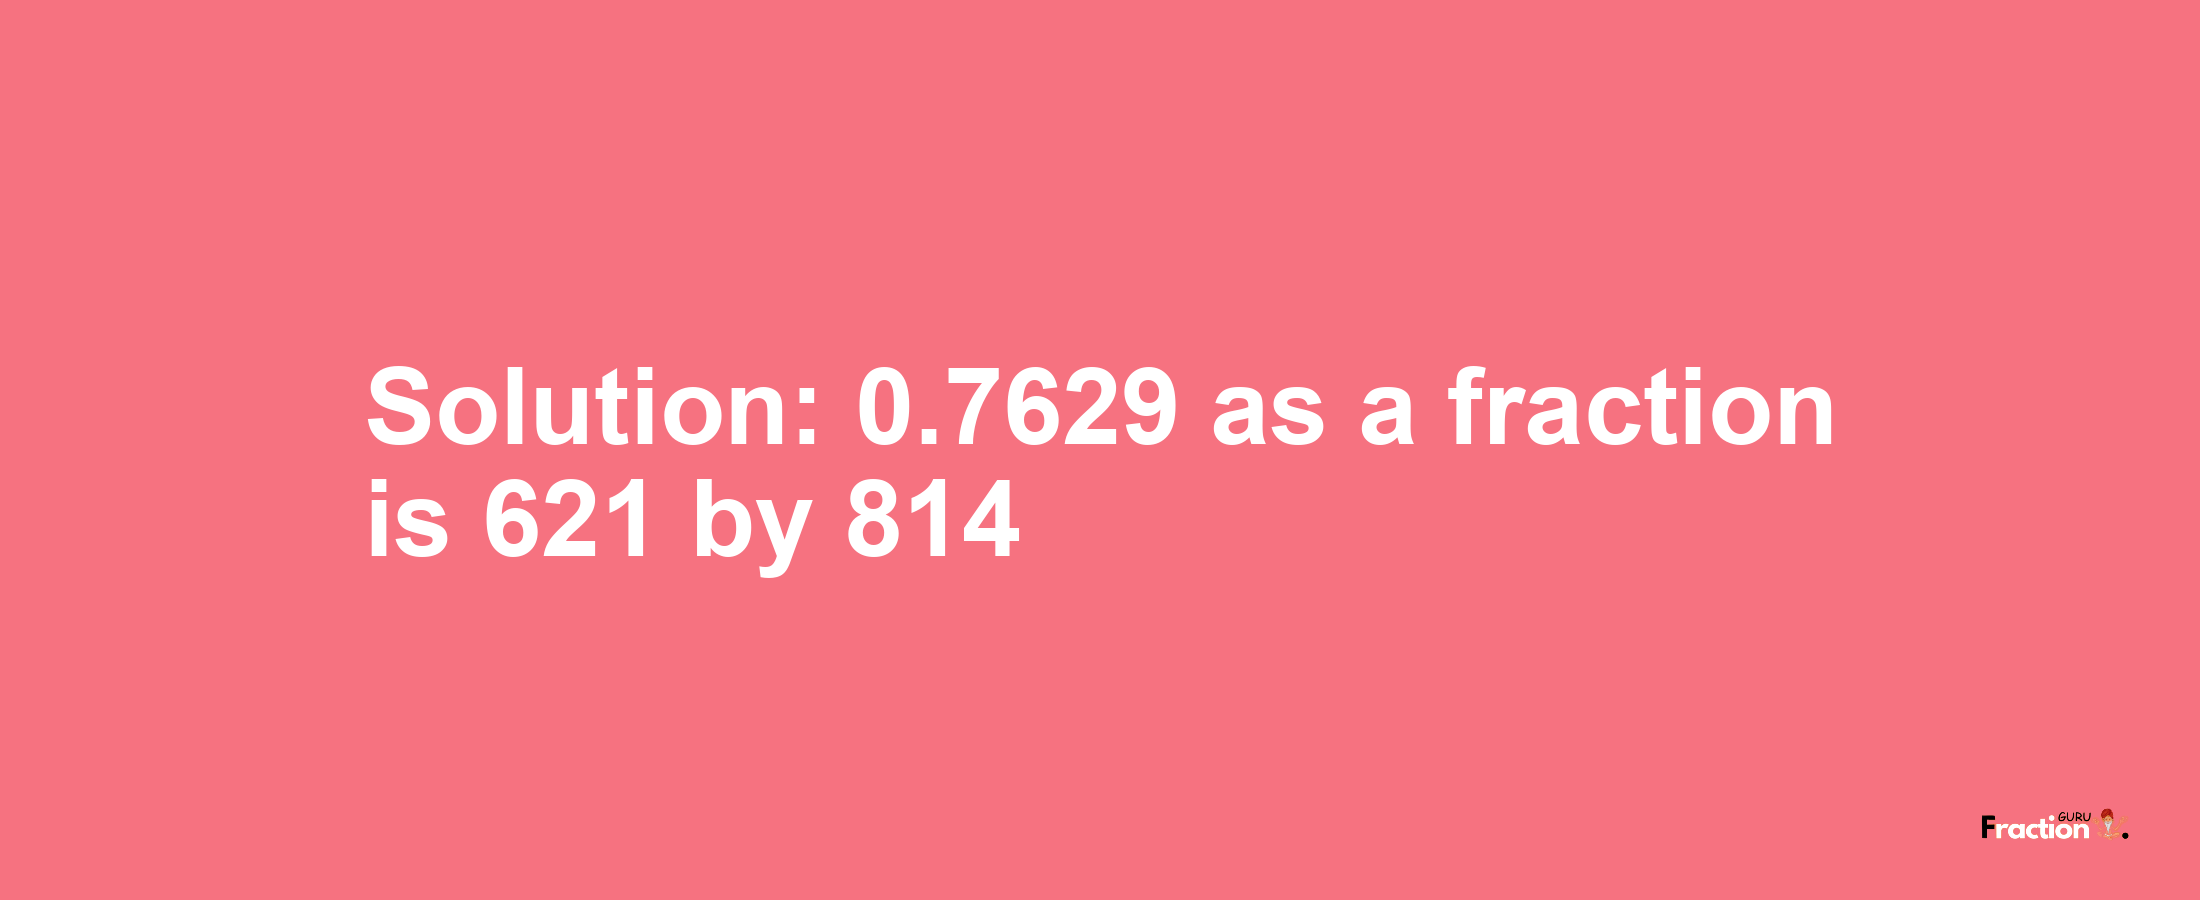 Solution:0.7629 as a fraction is 621/814